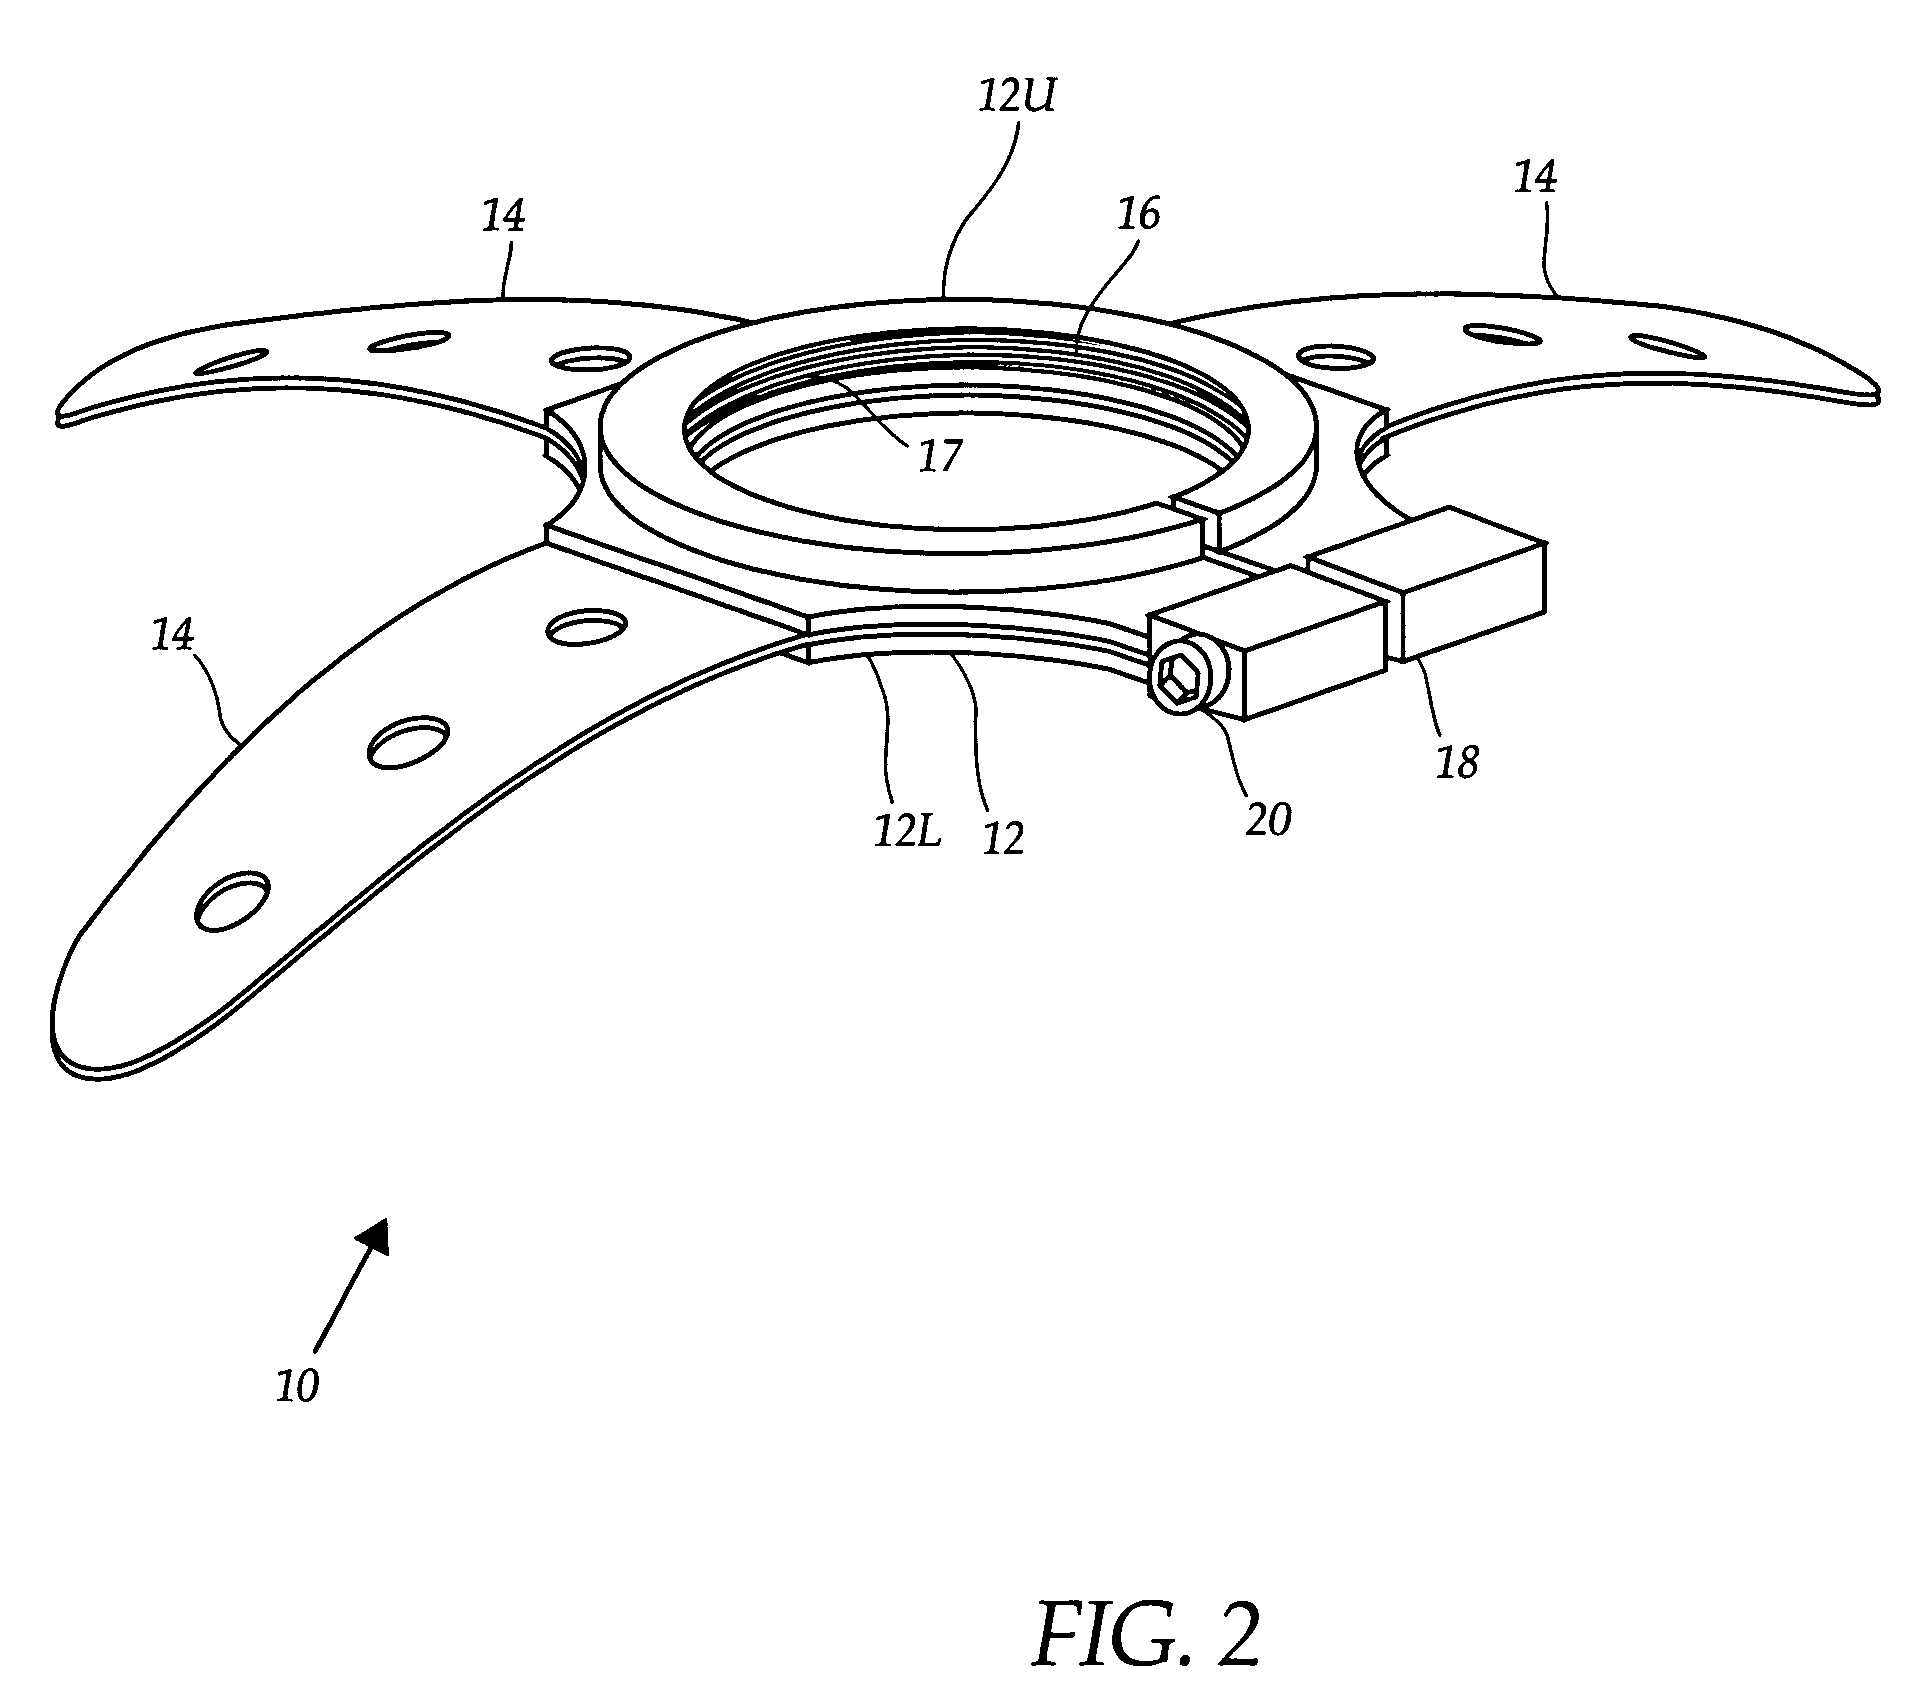 Flexible prong laminating adaptor for use in creating a laminated stump socket for attaching a prosthetic limb